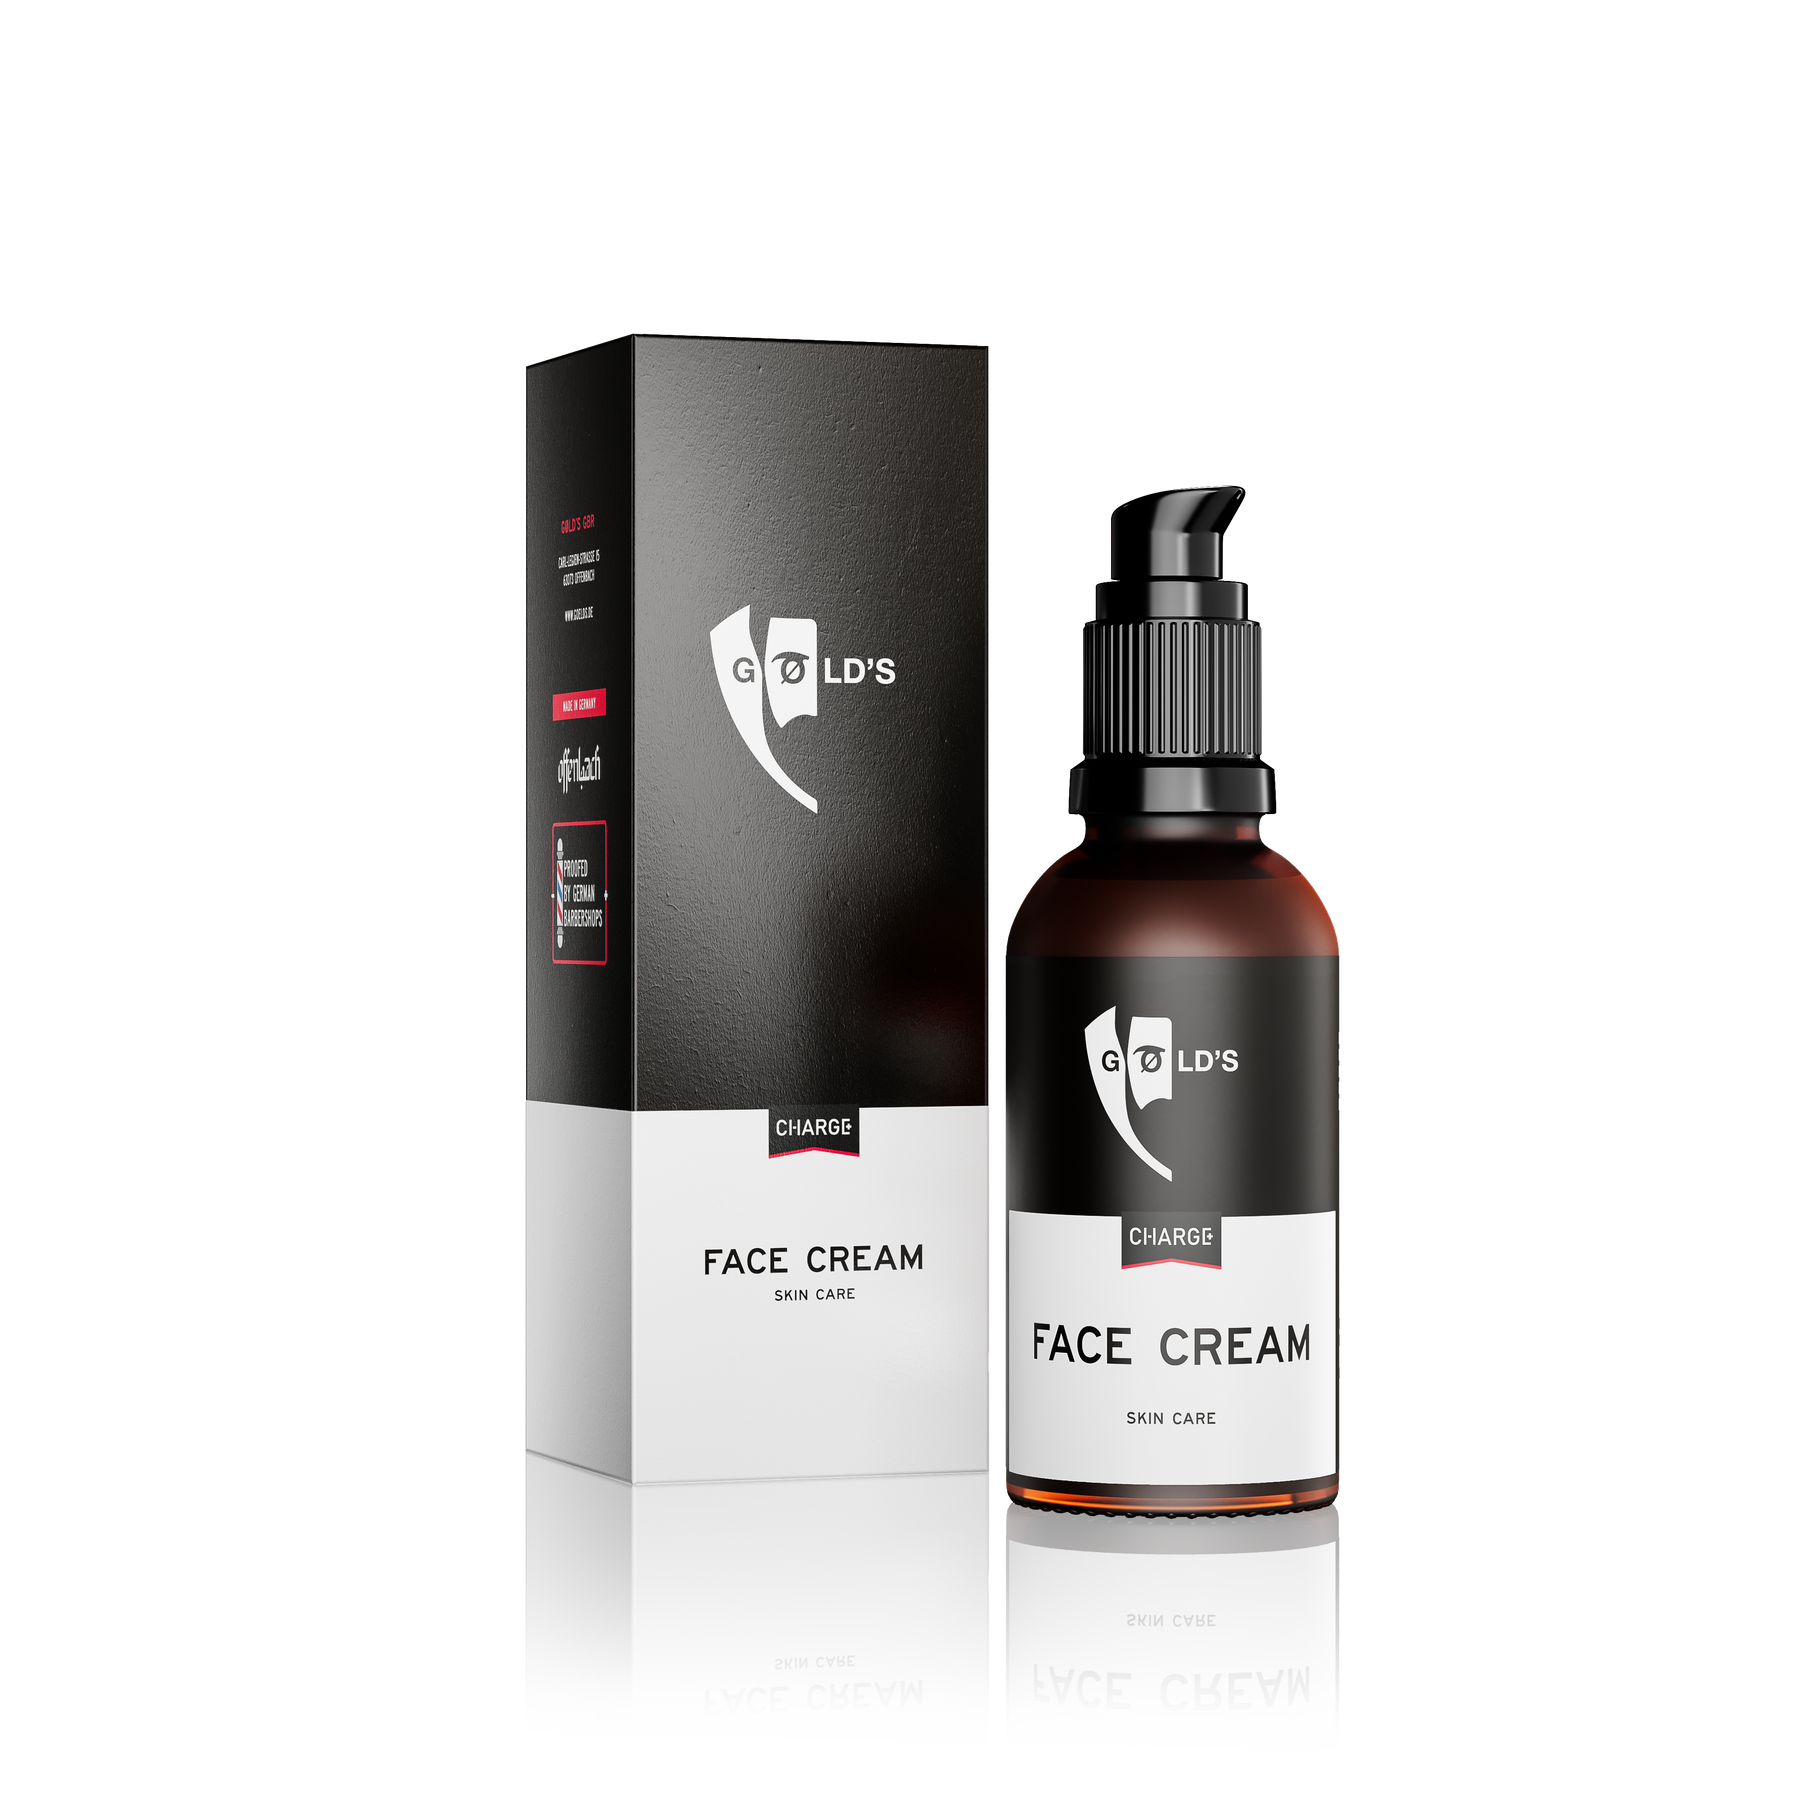 CHARGE Face Cream Gesichtscreme by GØLD's